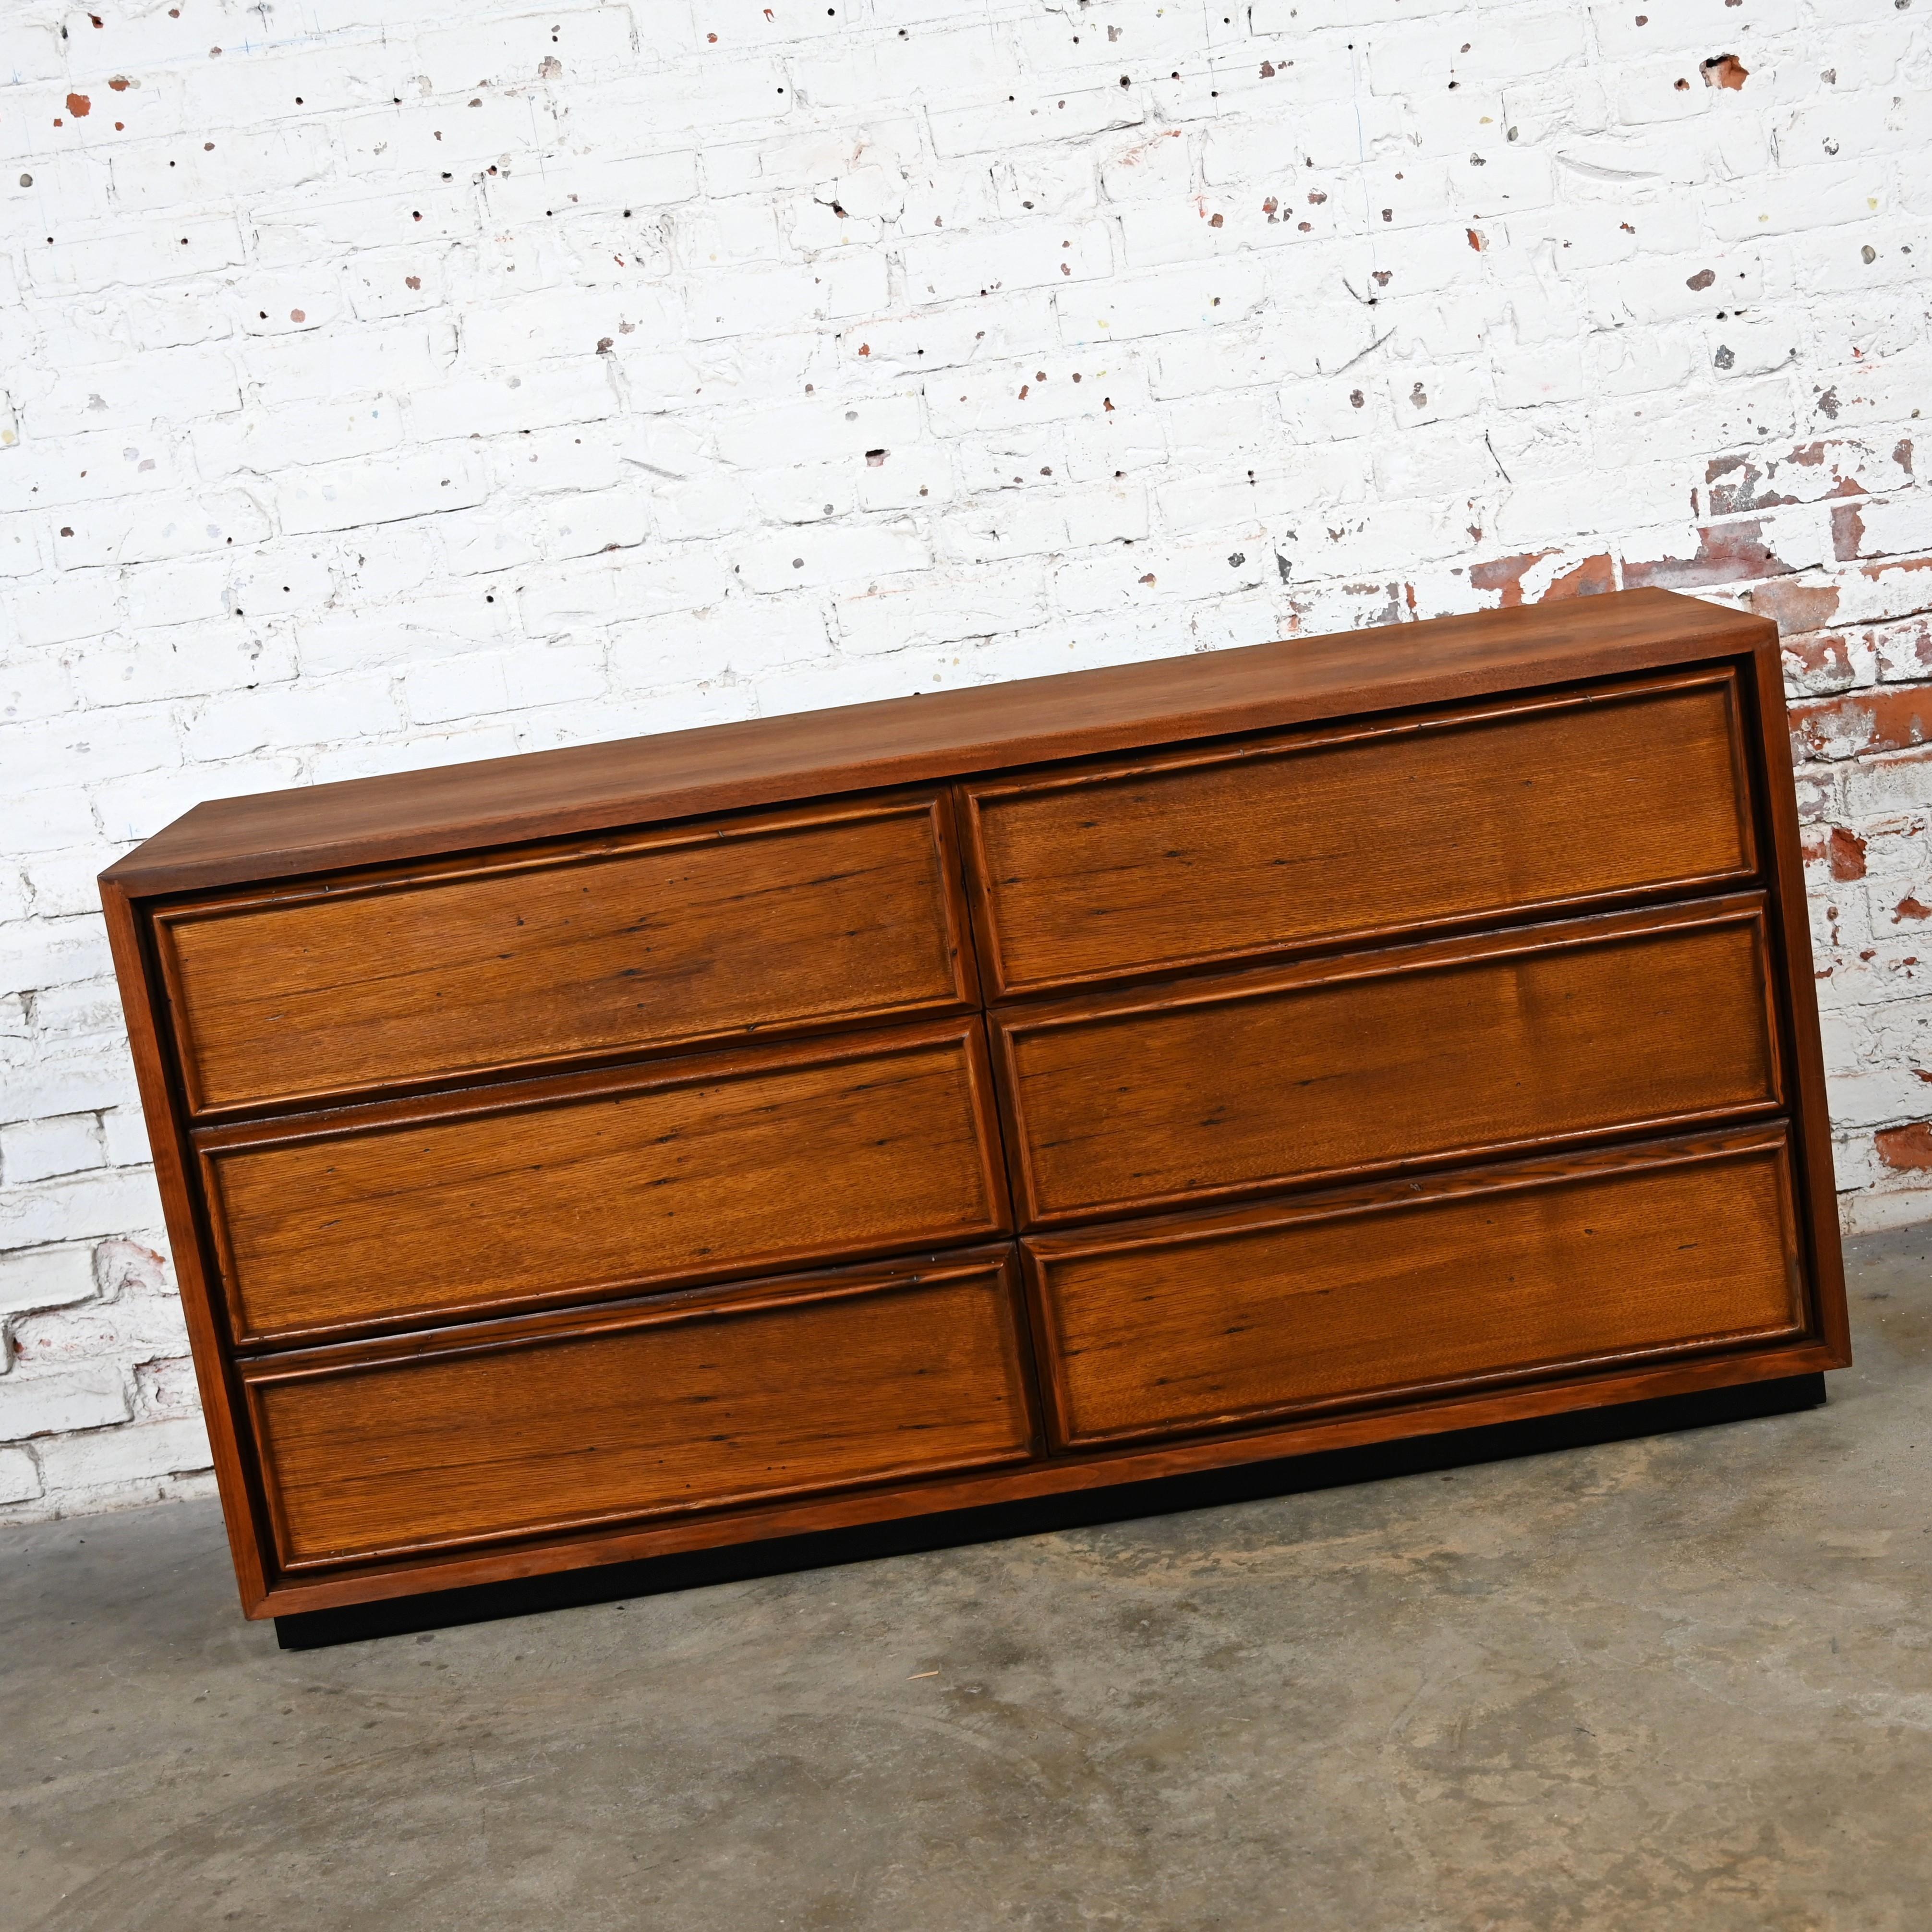 Mid Century Modern 6 Drawer Dresser by Dillingham Walnut & Pecky Cypress In Good Condition For Sale In Topeka, KS